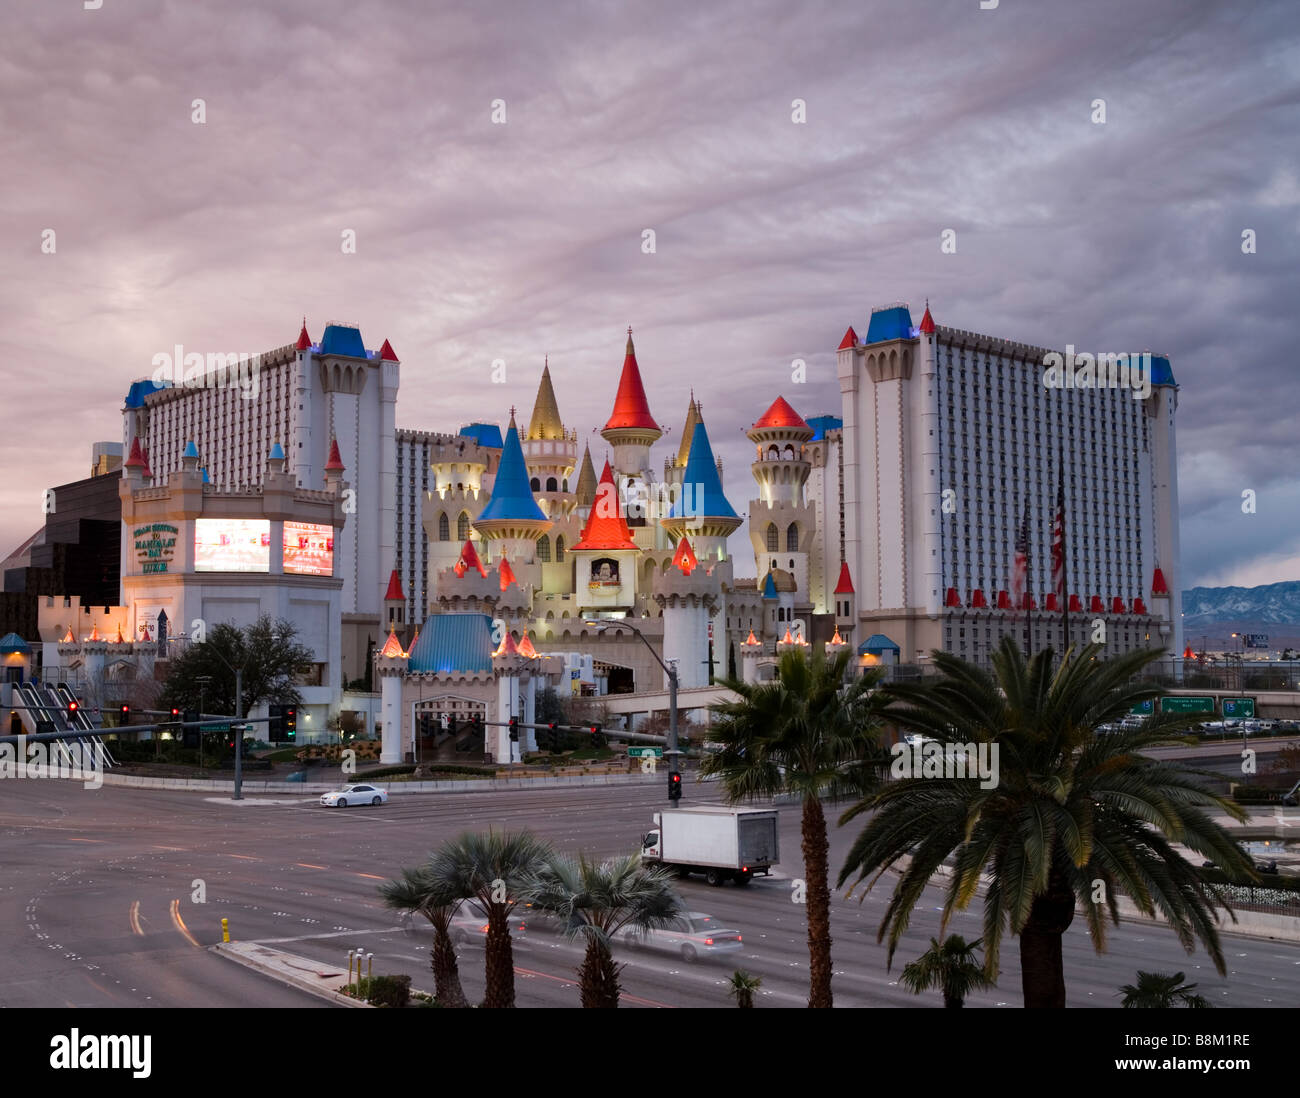 Dark clouds over the Excalibur Hotel and casino on the Las Vegas strip, Nevada, USA Stock Photo